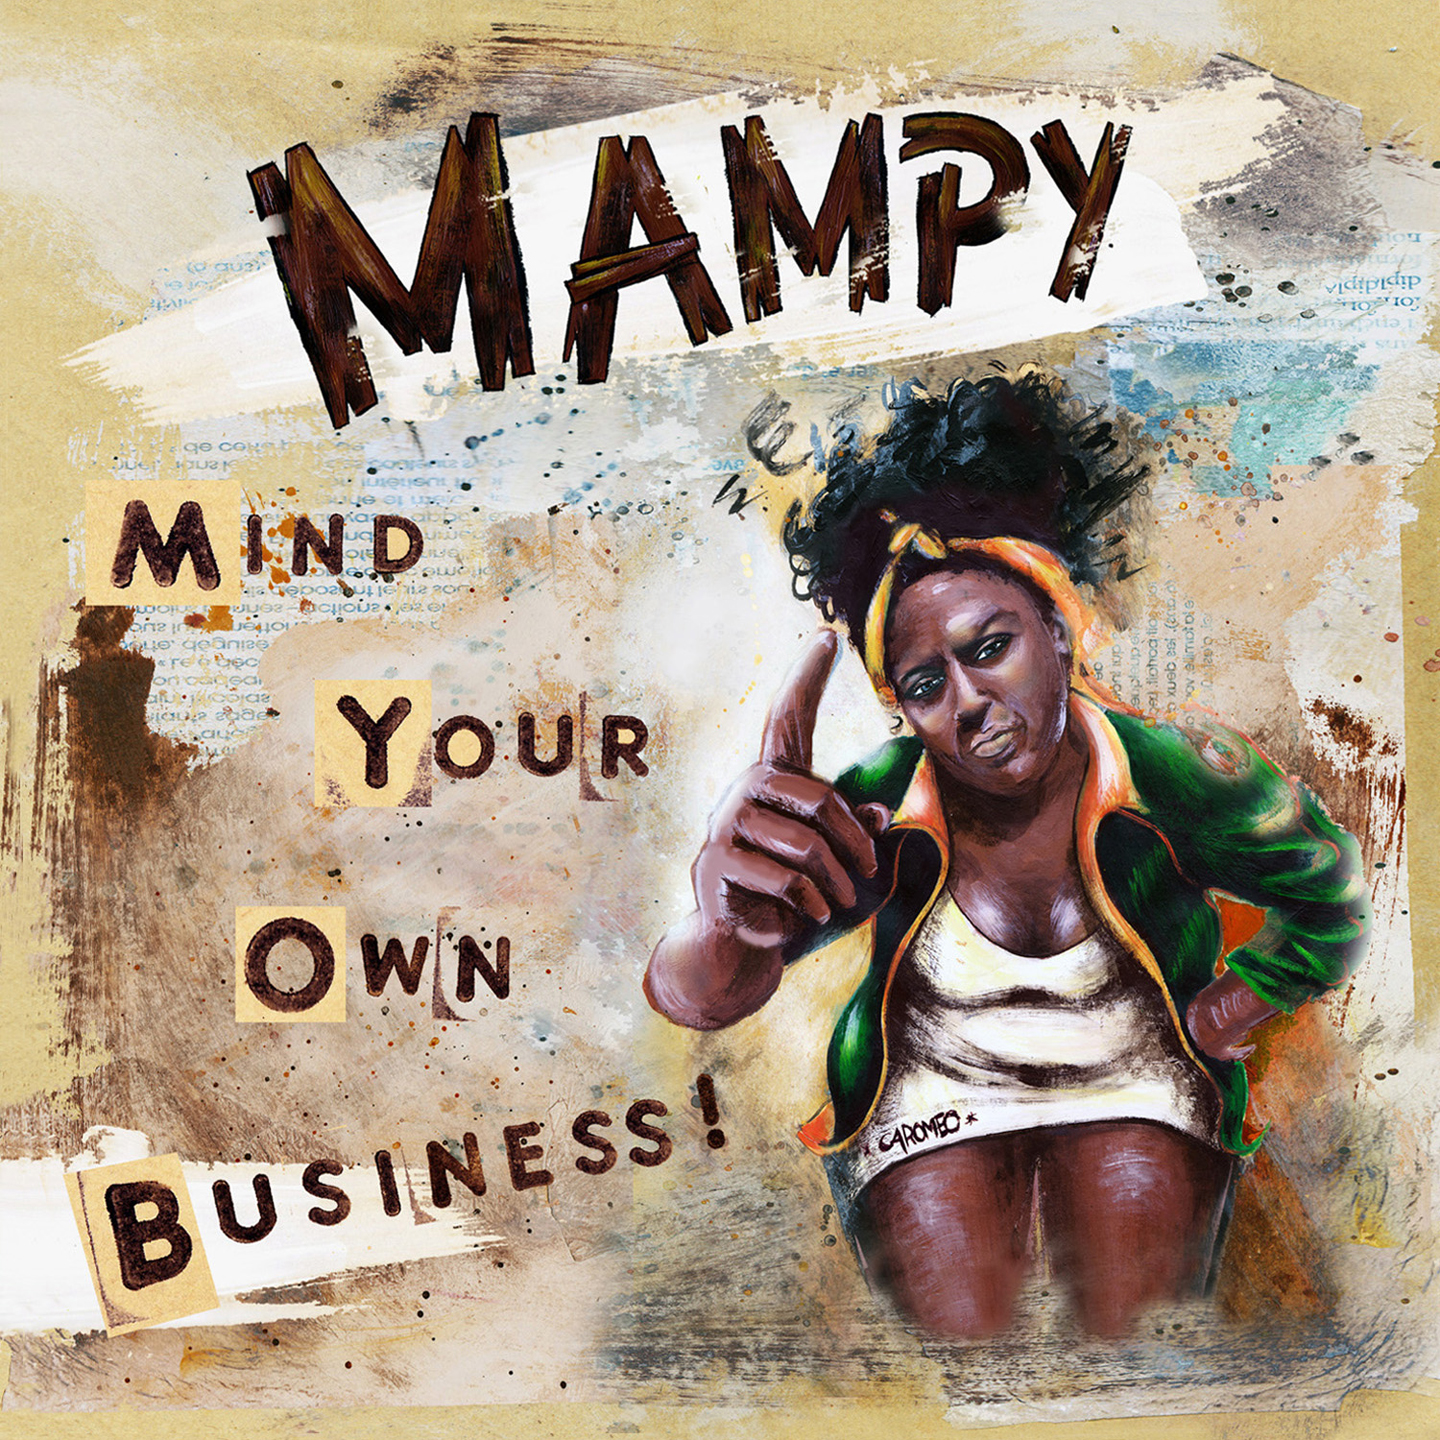 Mampy – Mind my own business